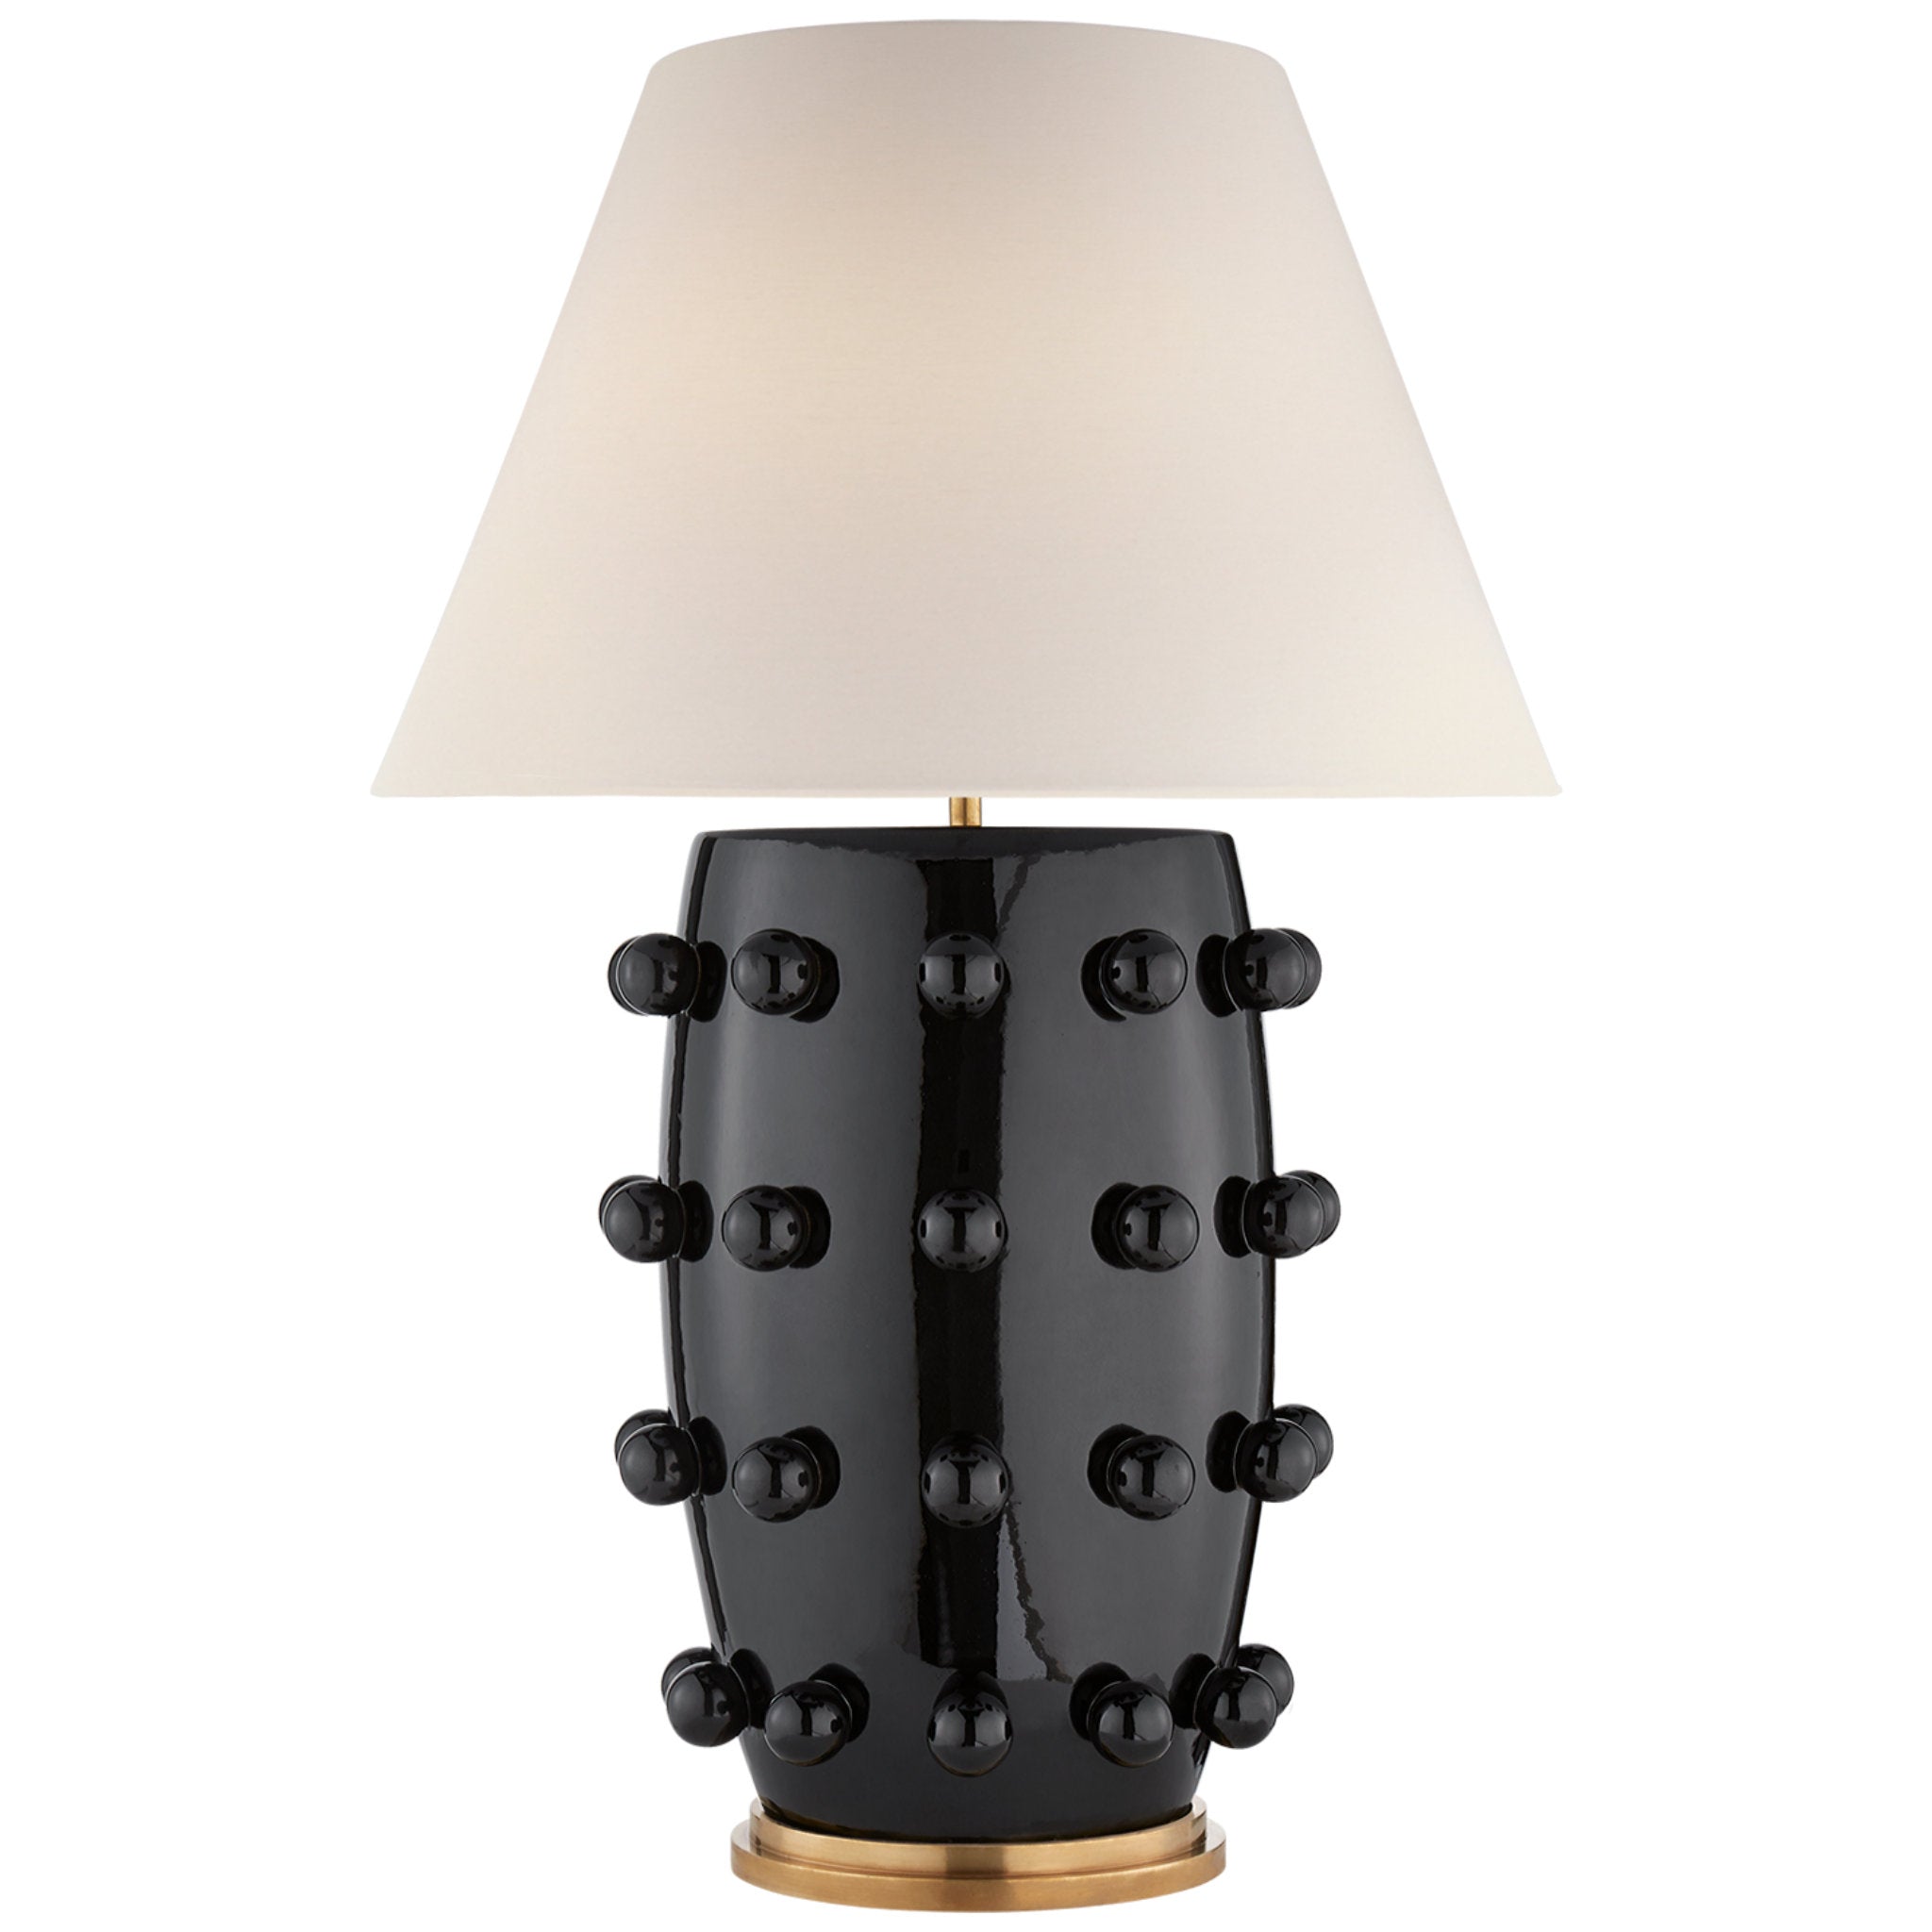 Kelly Wearstler Linden Table Lamp in Black with Linen Shade